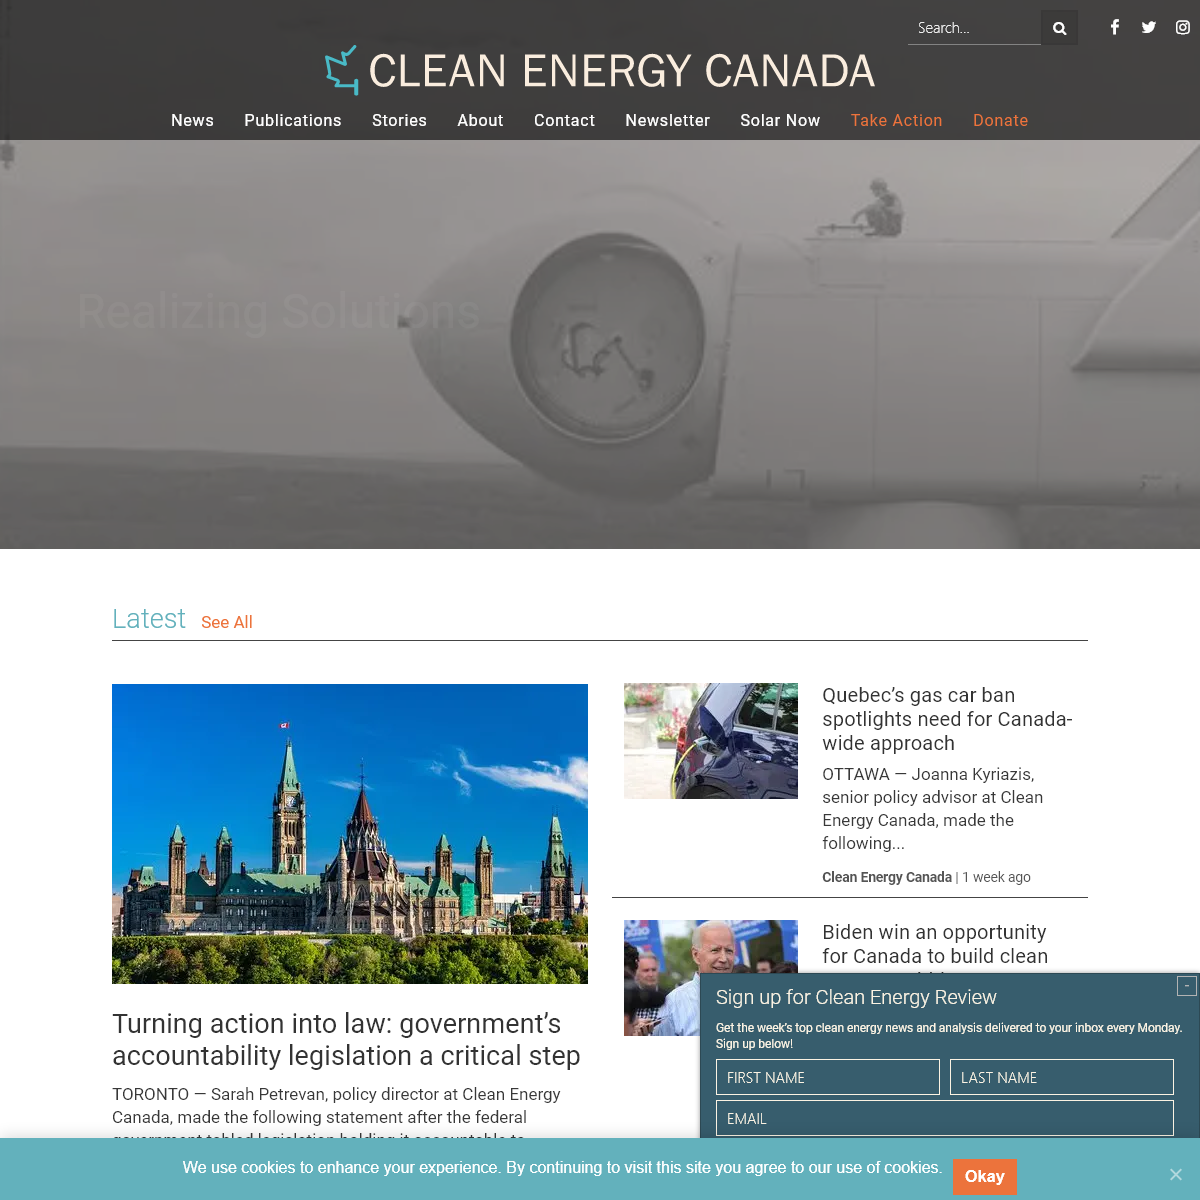 A complete backup of cleanenergycanada.org